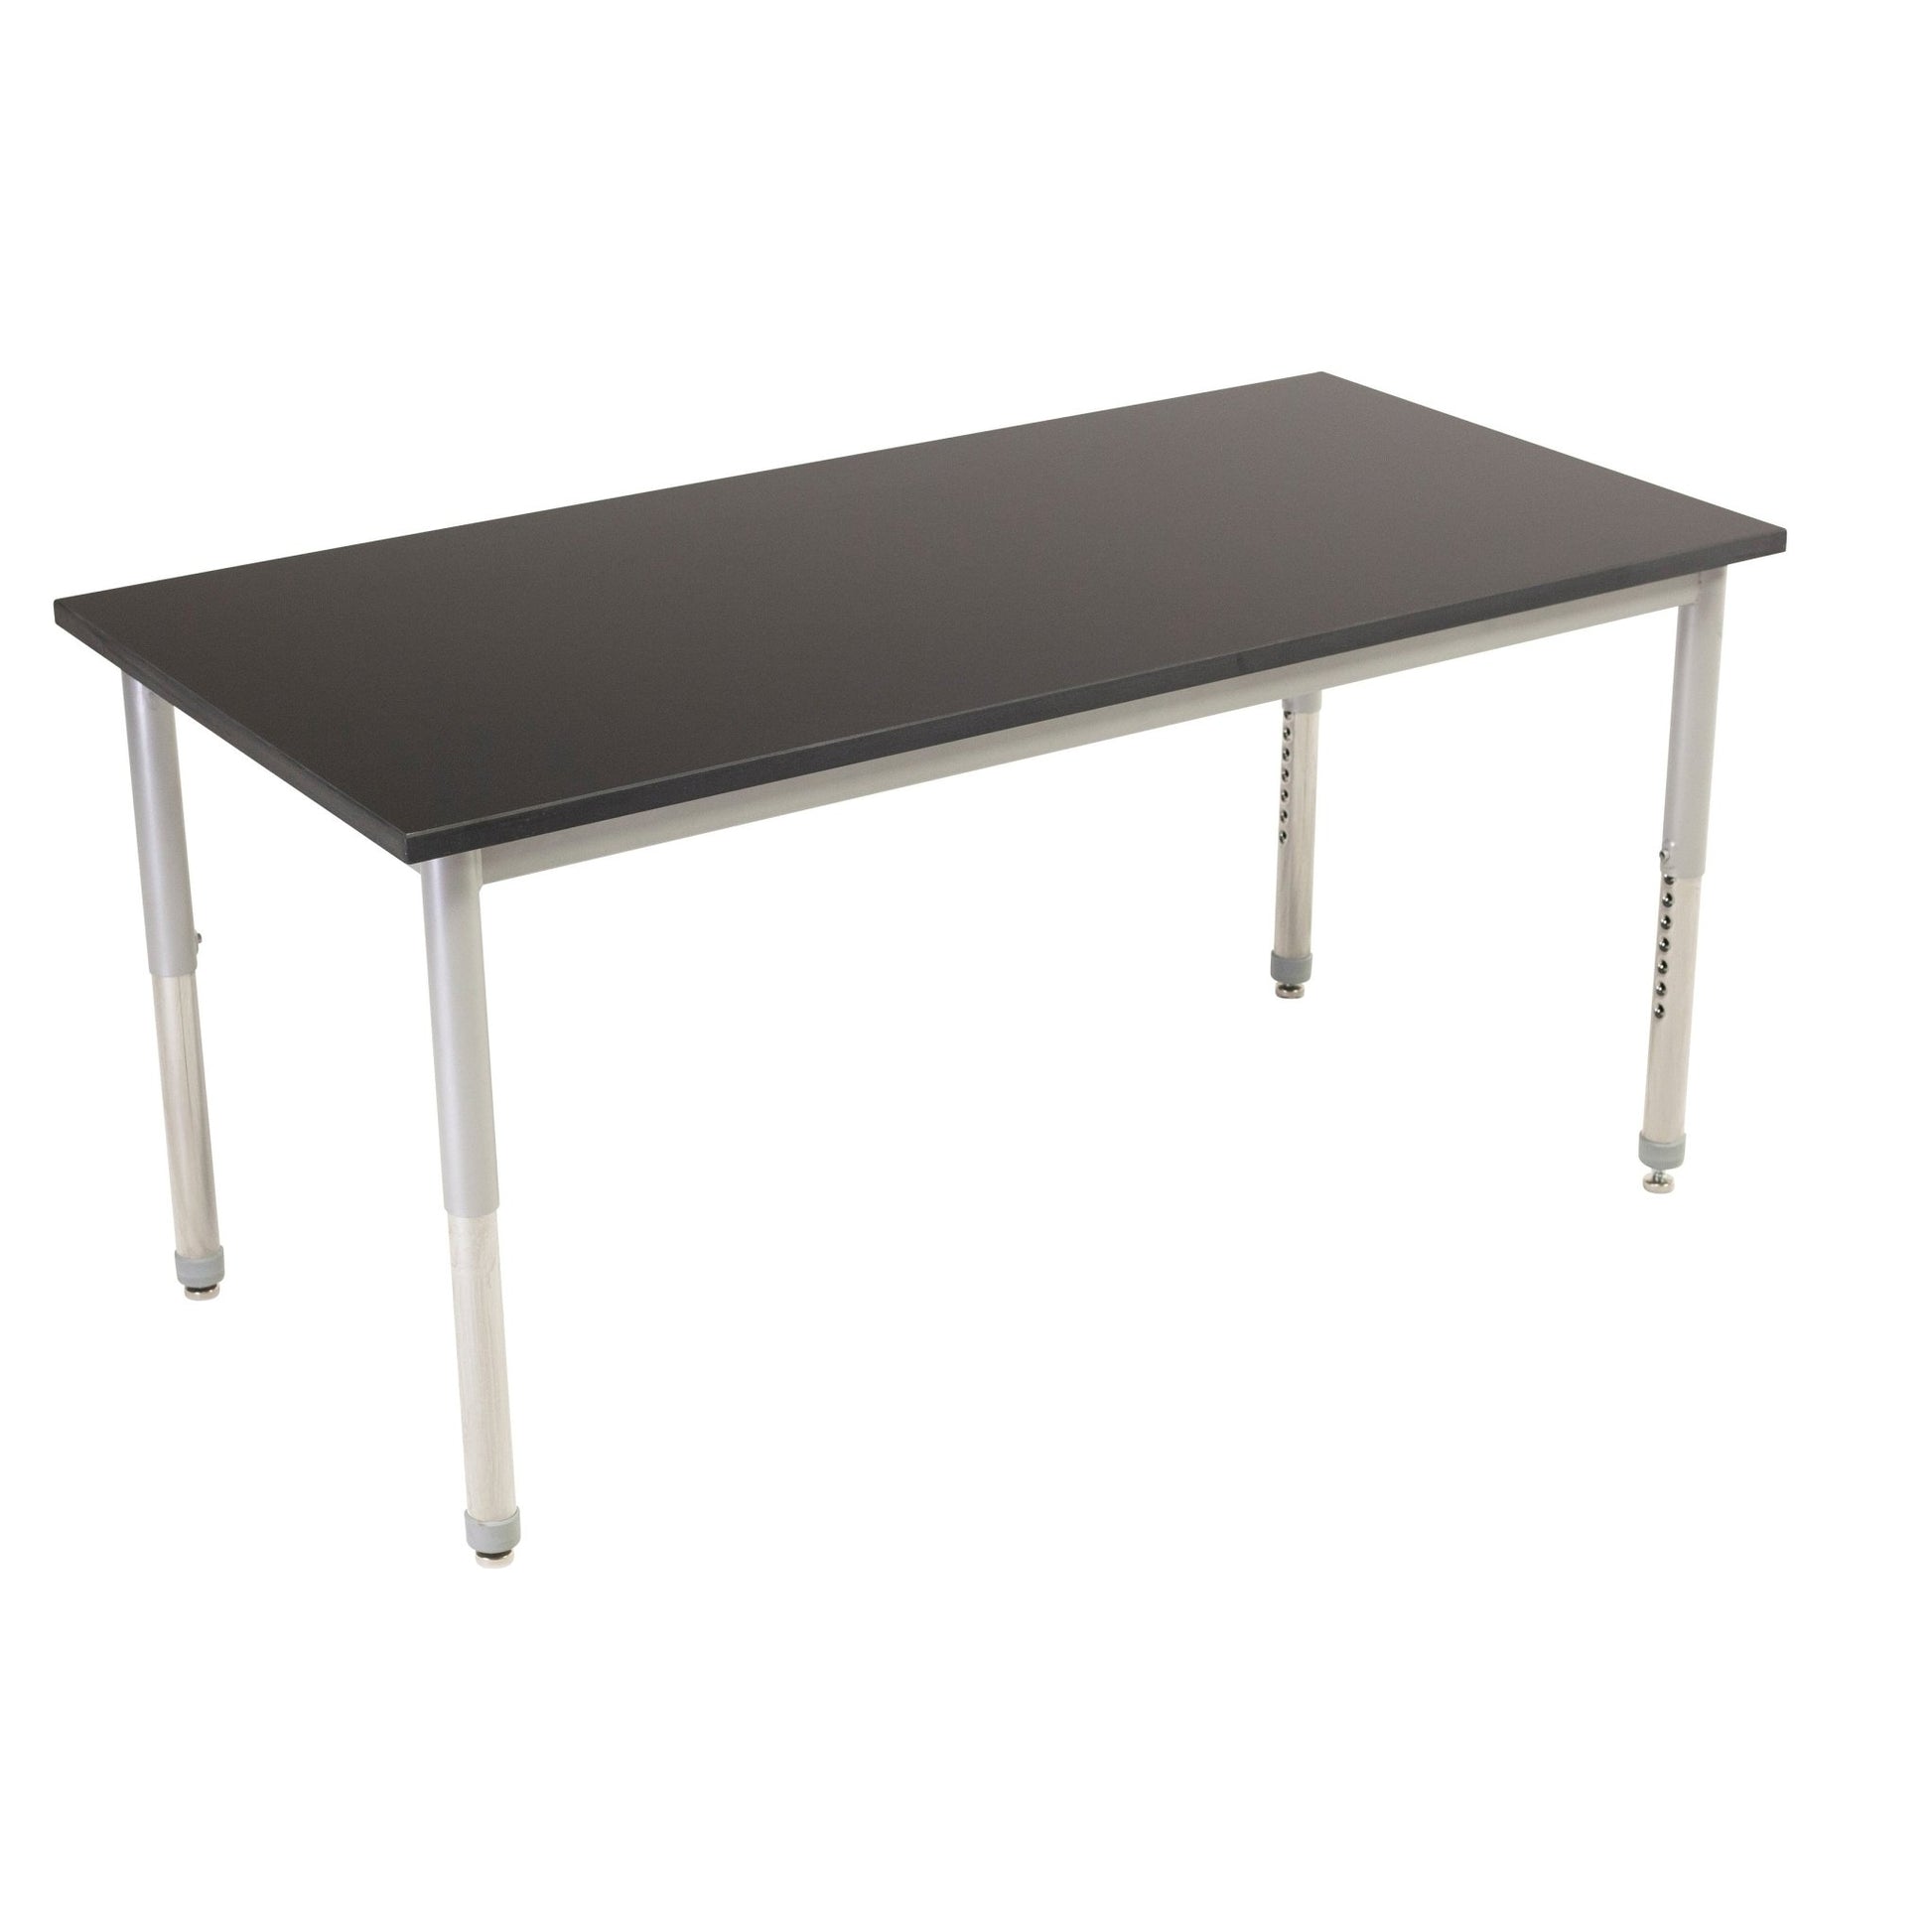 AmTab Science Lab Table - 24"W x 60"L x Adjustable Height 30" to 38" - Phenolic Resin Chem Res Top (AMT-SCI245PR) - SchoolOutlet